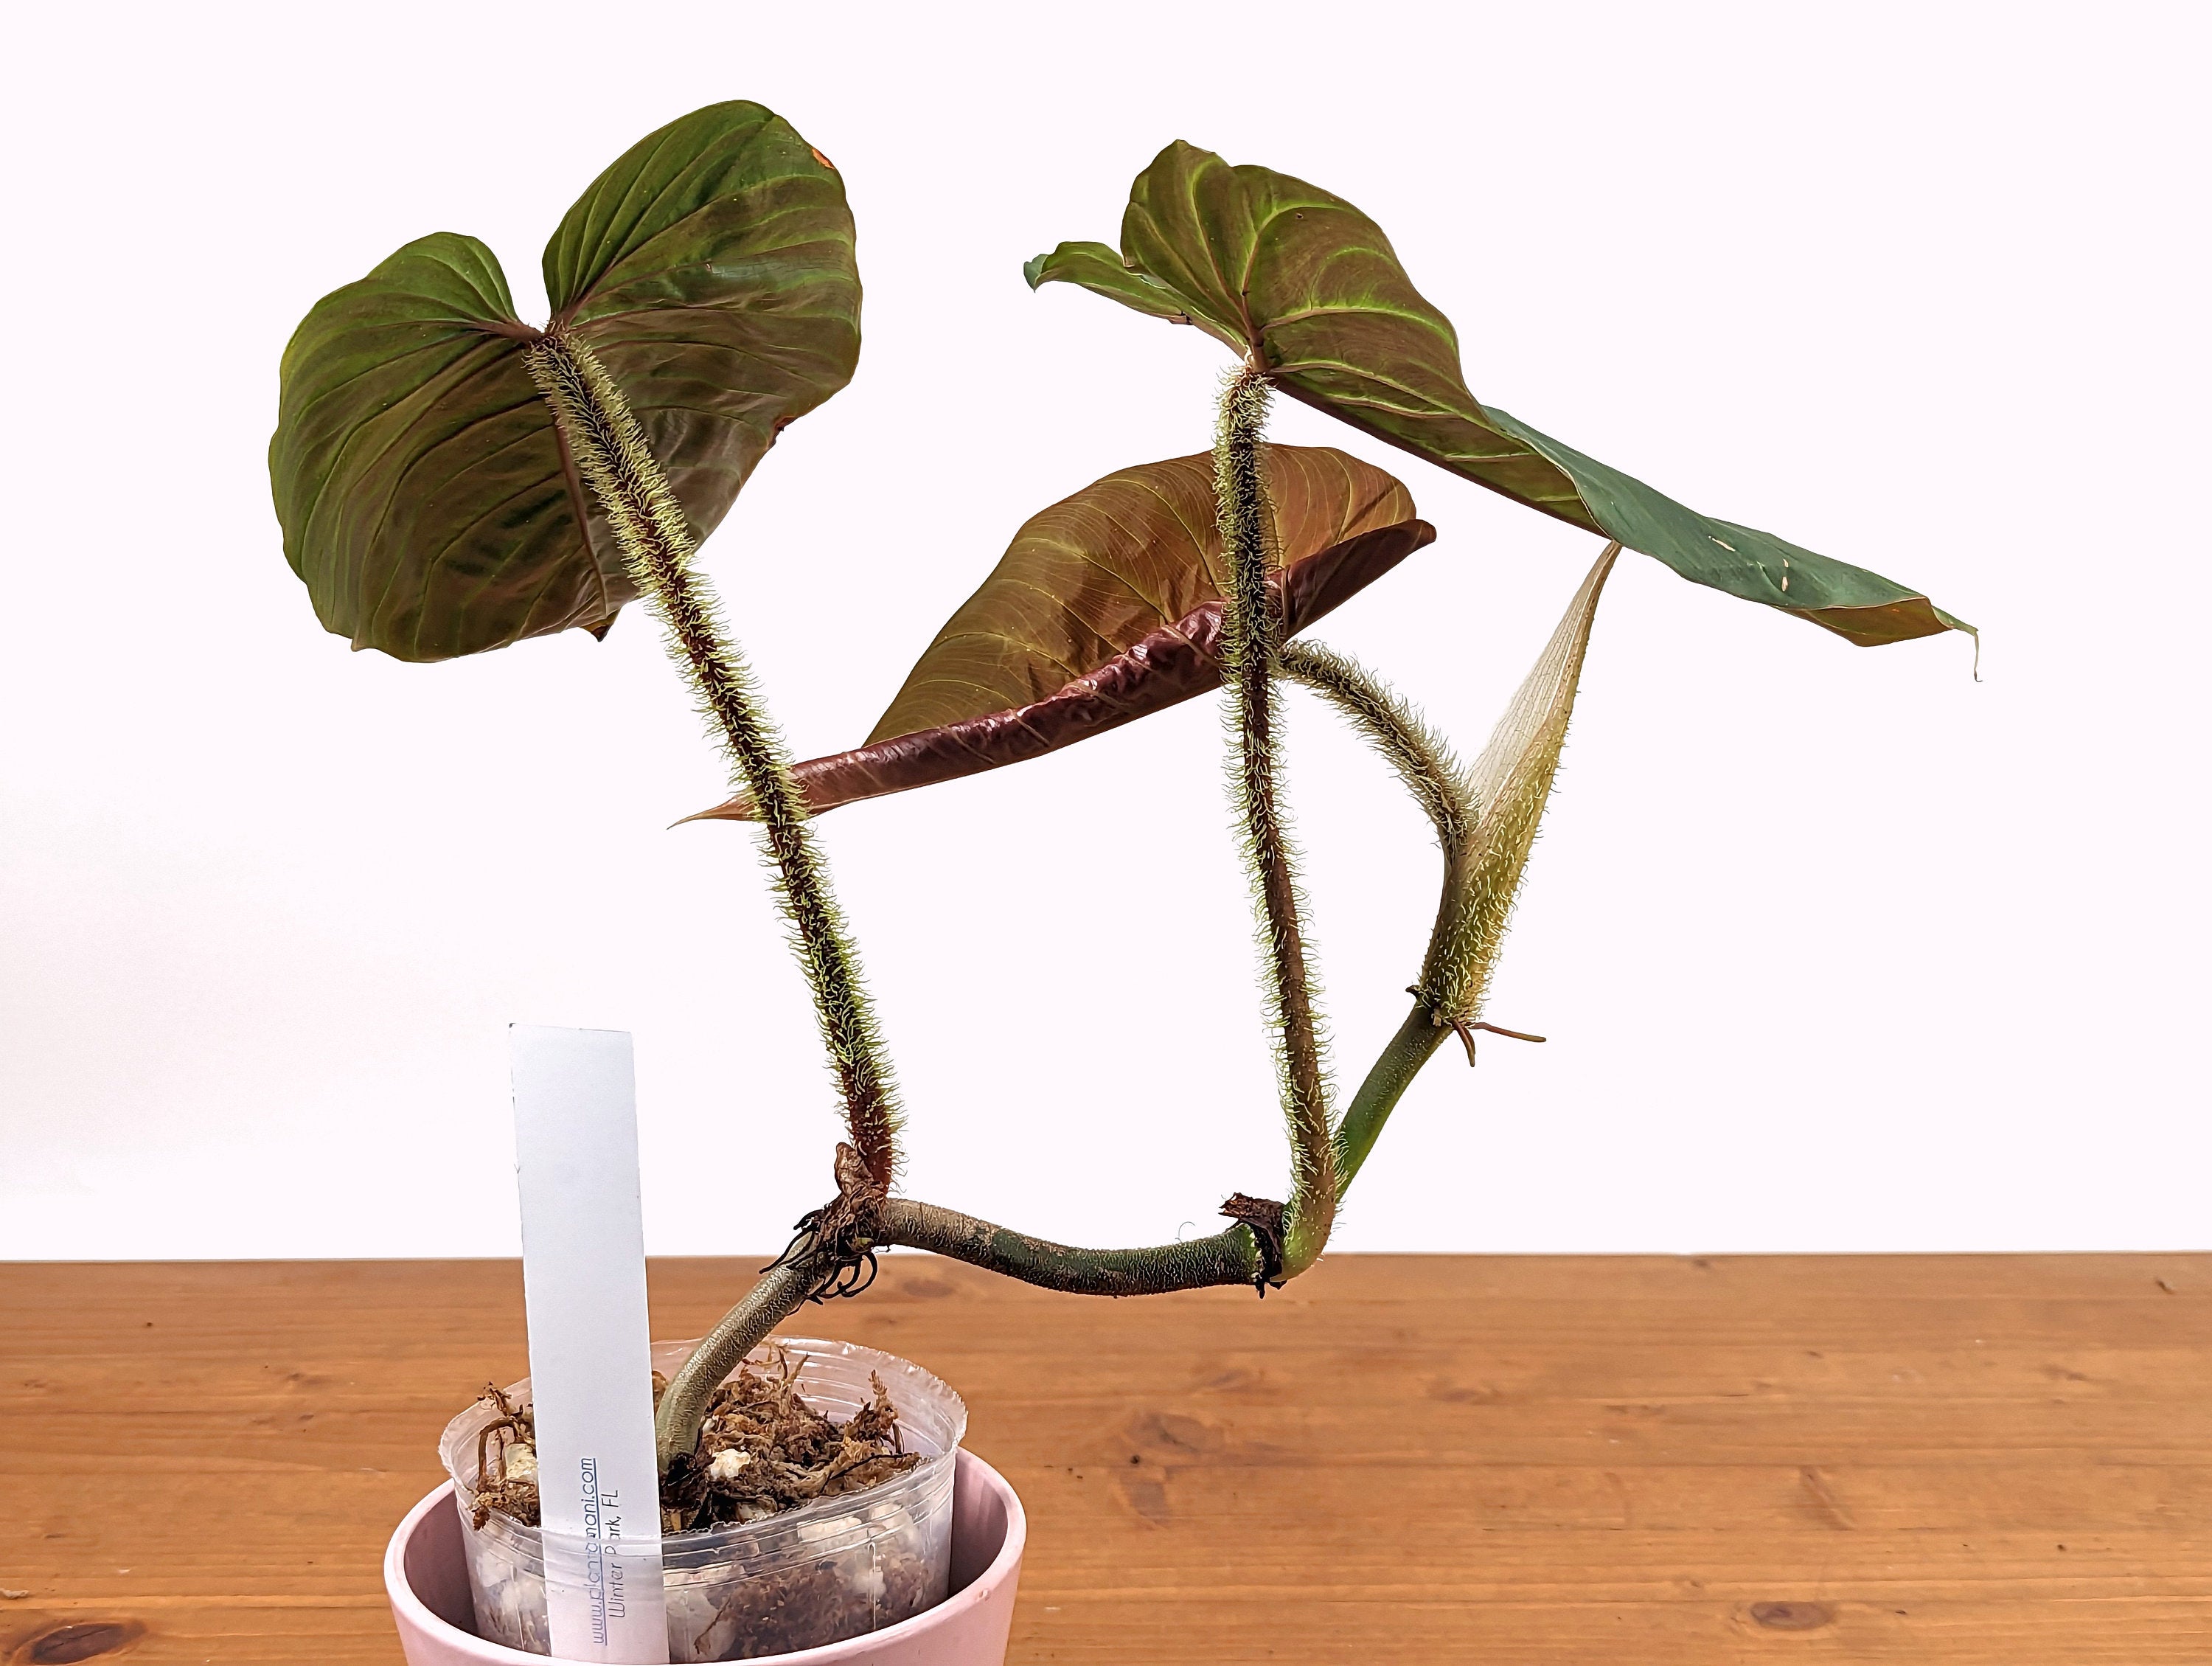 Philodendron serpens x verrucosum - Exact Plant Pictured 